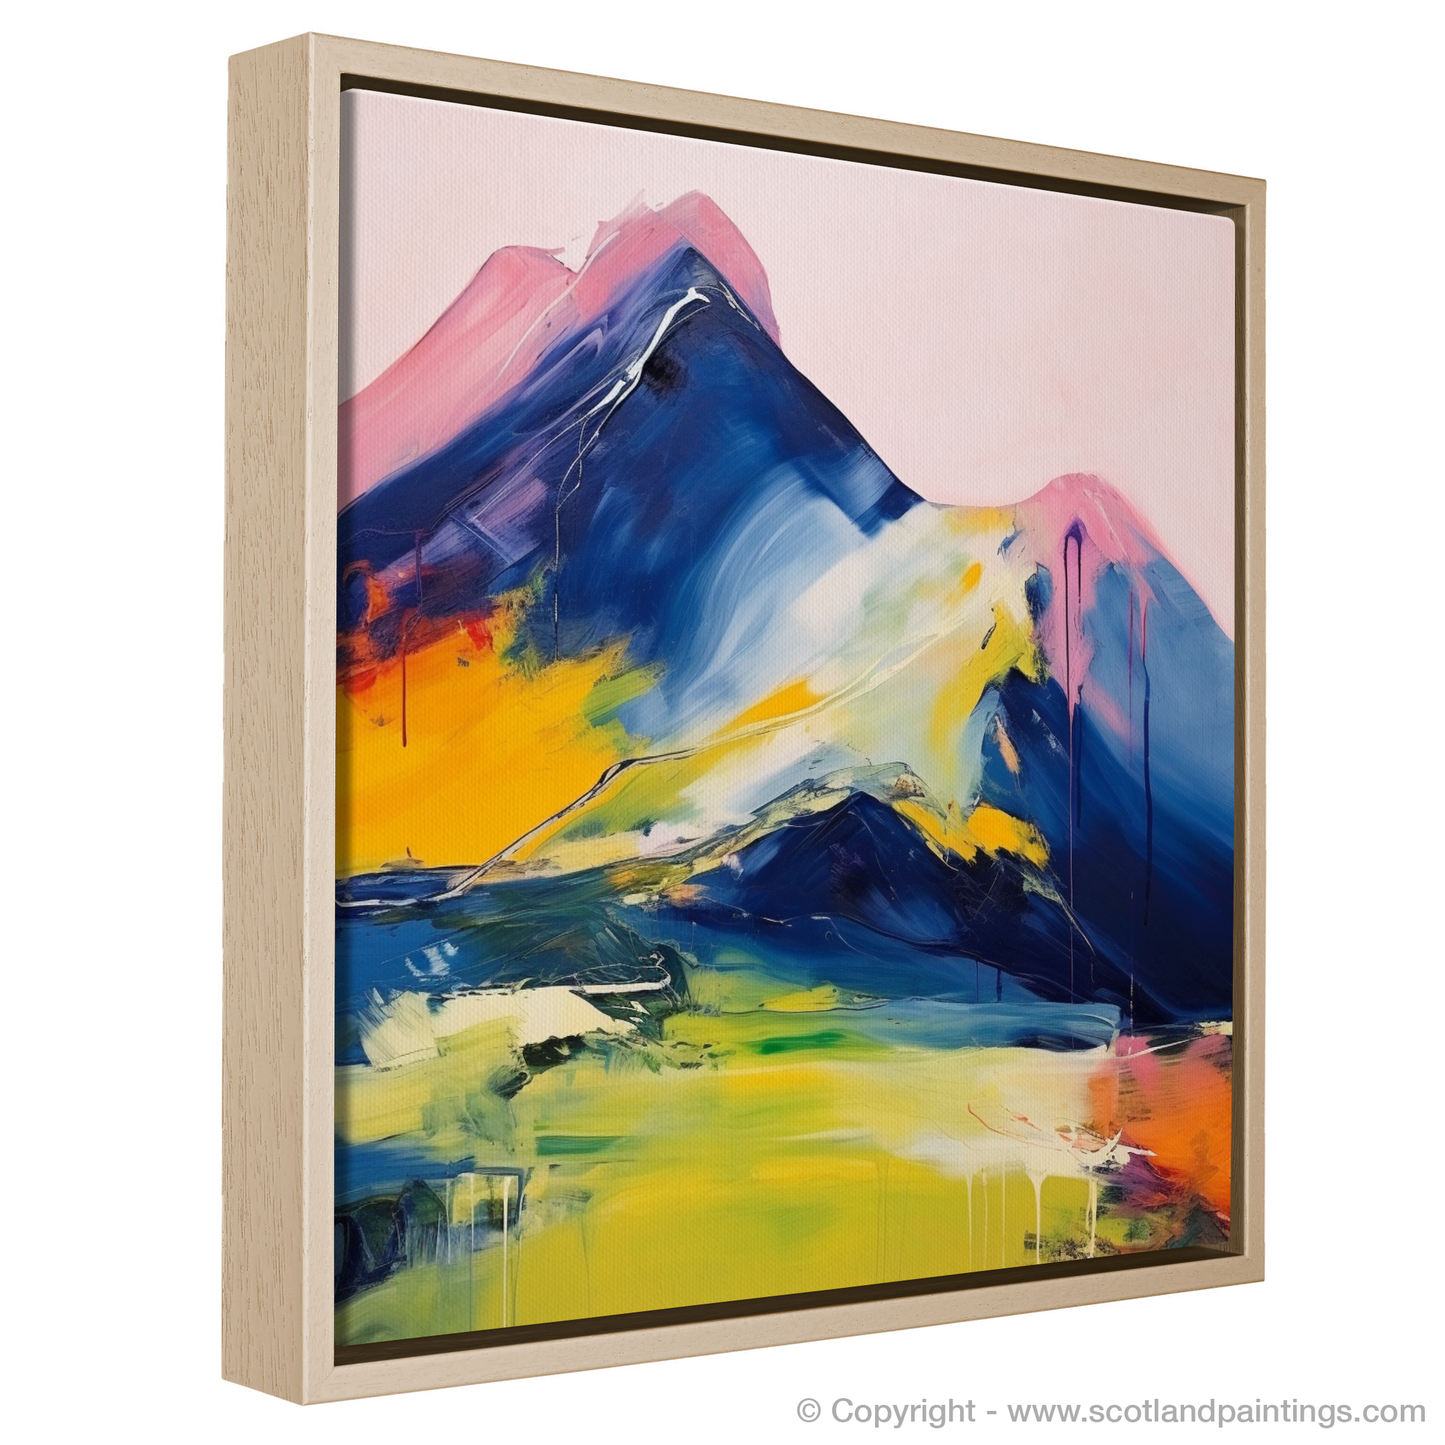 Painting and Art Print of Beinn Narnain entitled "Abstract Essence of Beinn Narnain".